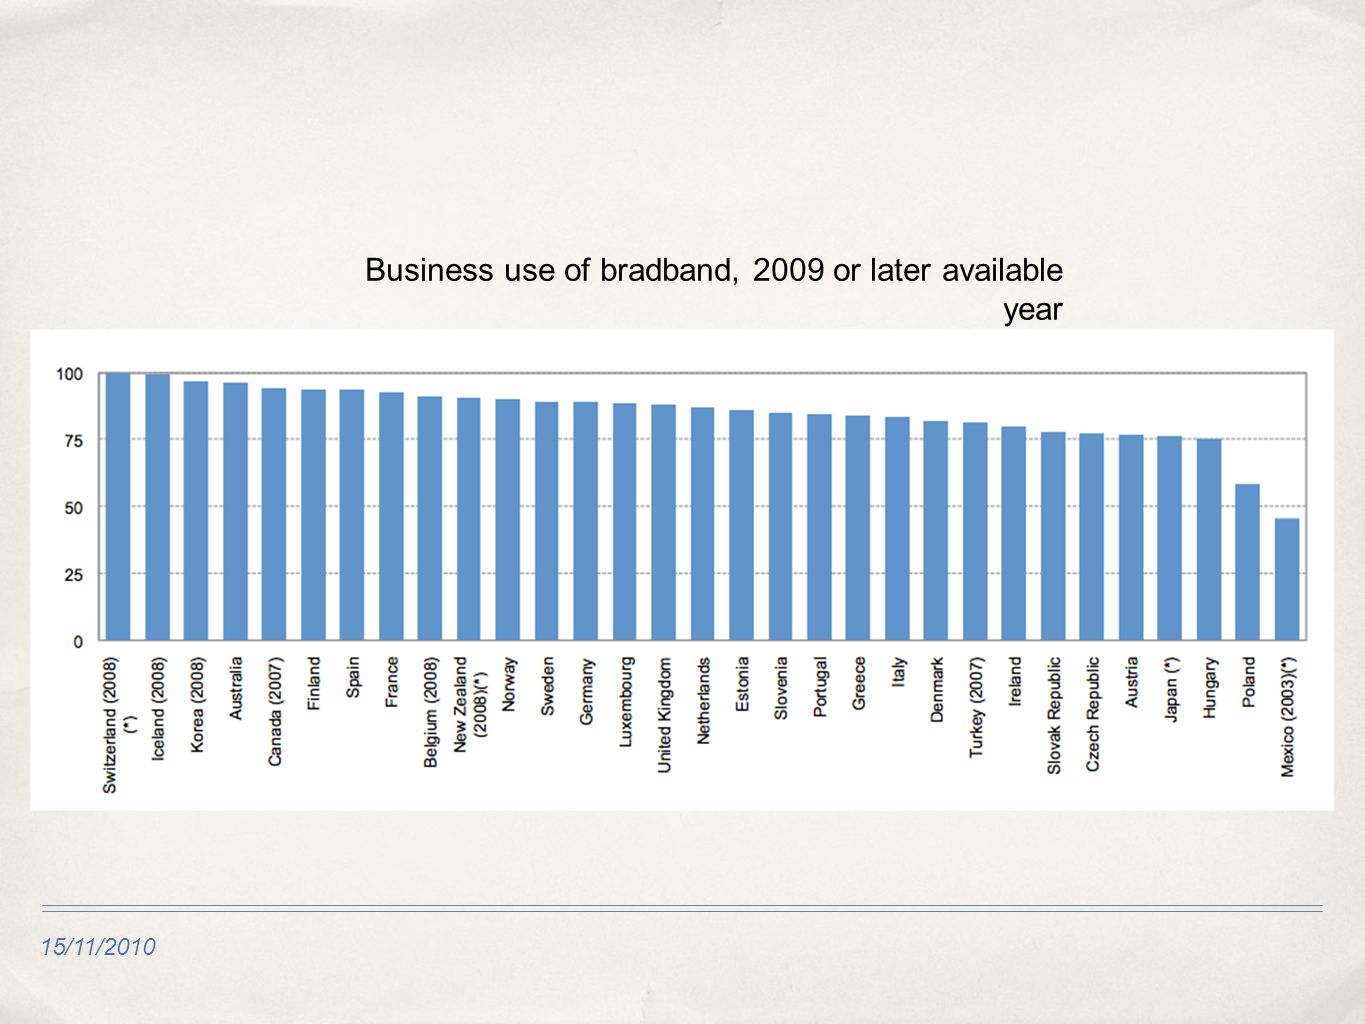 15/11/2010 Business use of bradband, 2009 or later available year